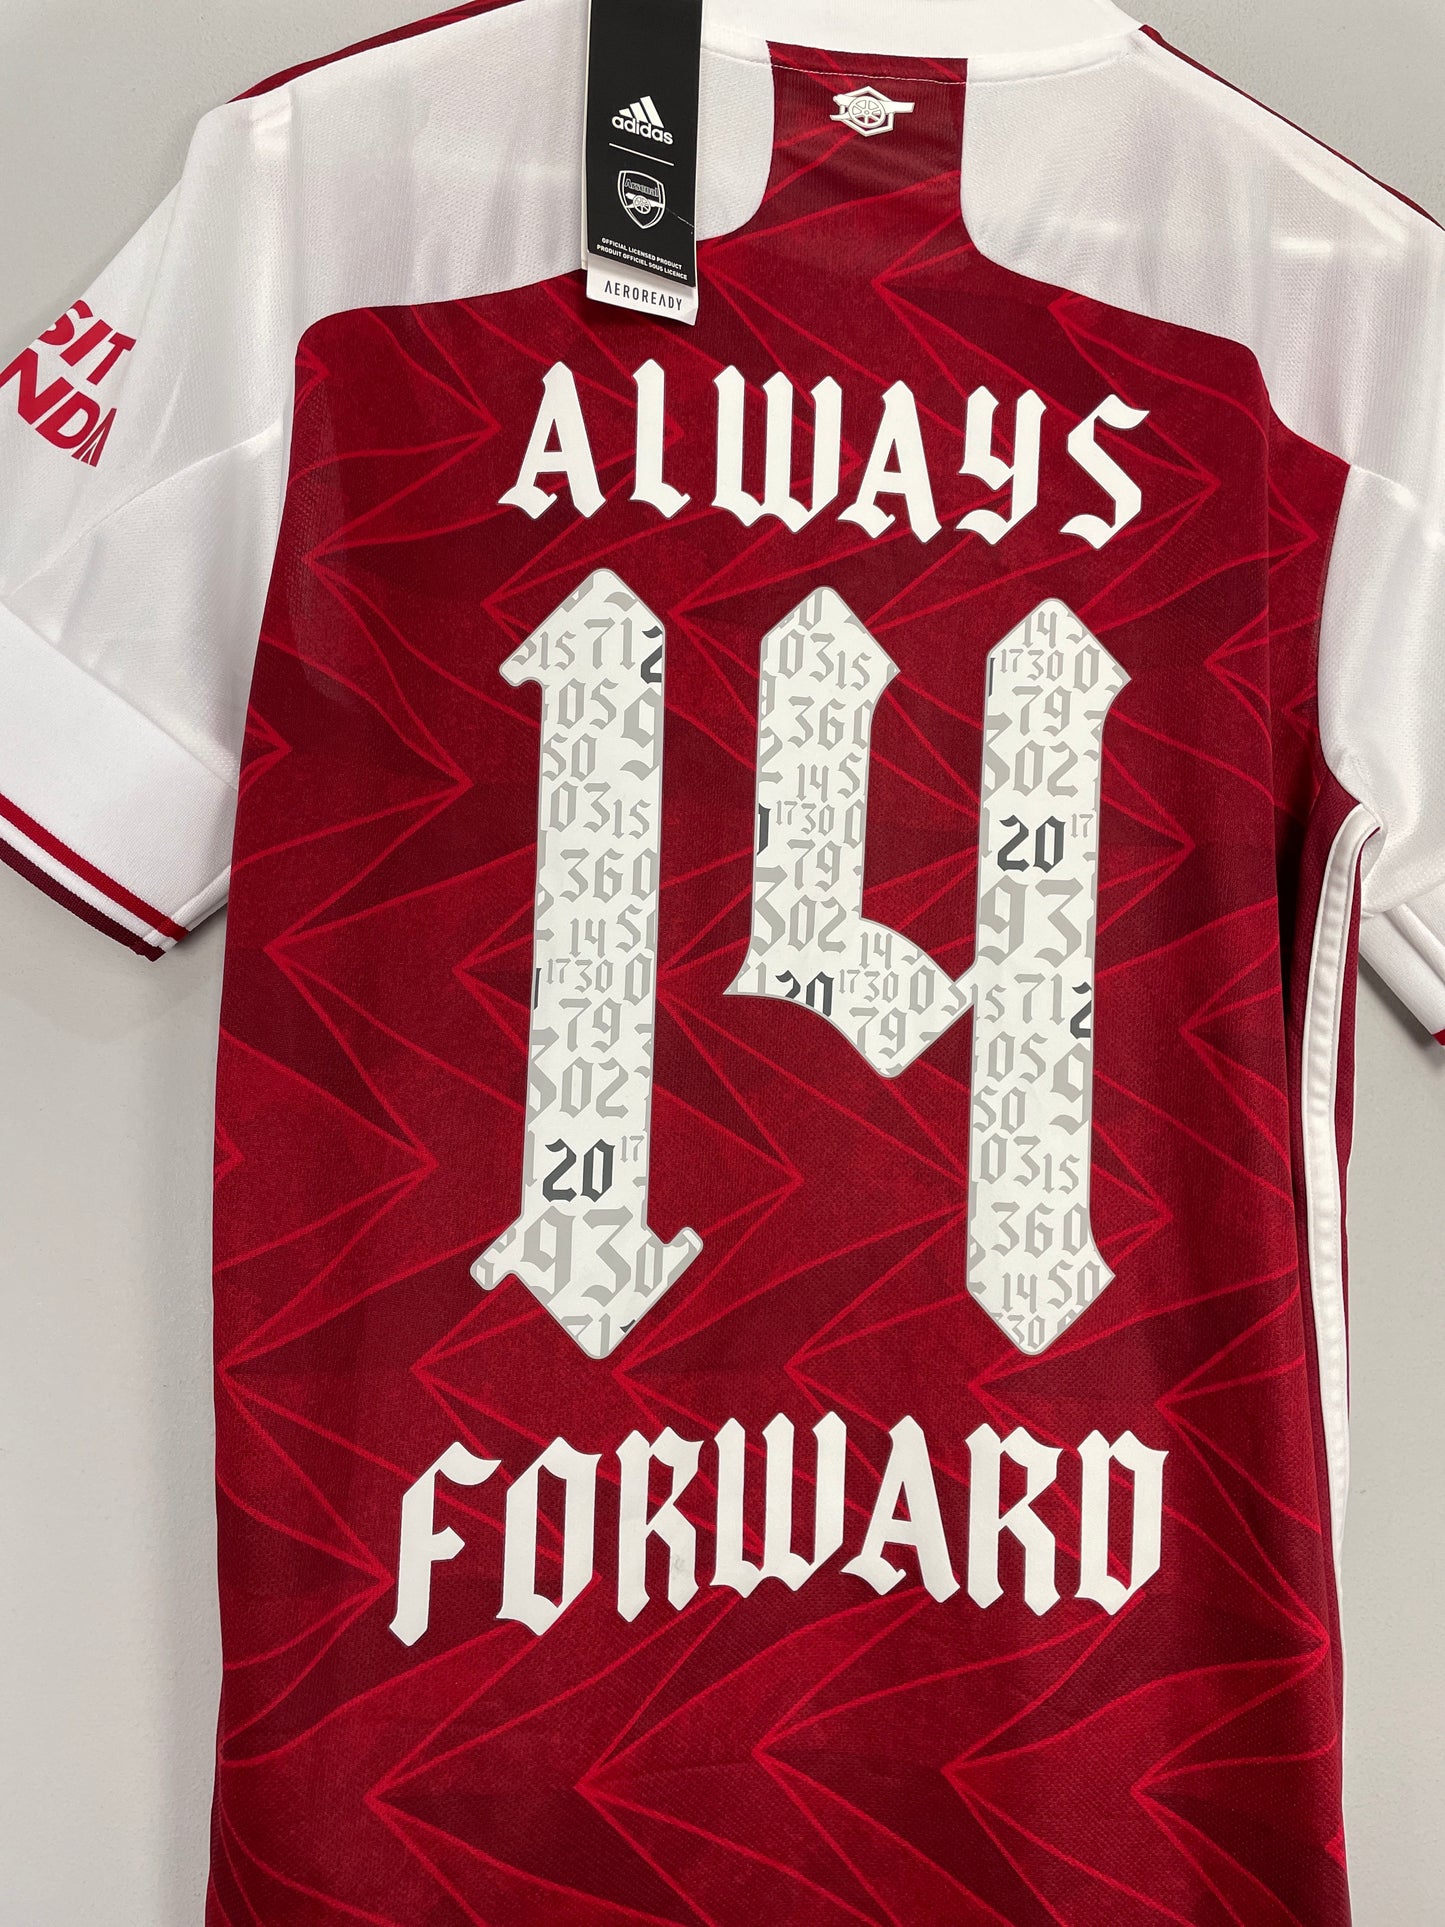 2020/21 ARSENAL ALWAYS #14 FOREVER *BNWT* FA CUP HOME SHIRT (M) ADIDAS